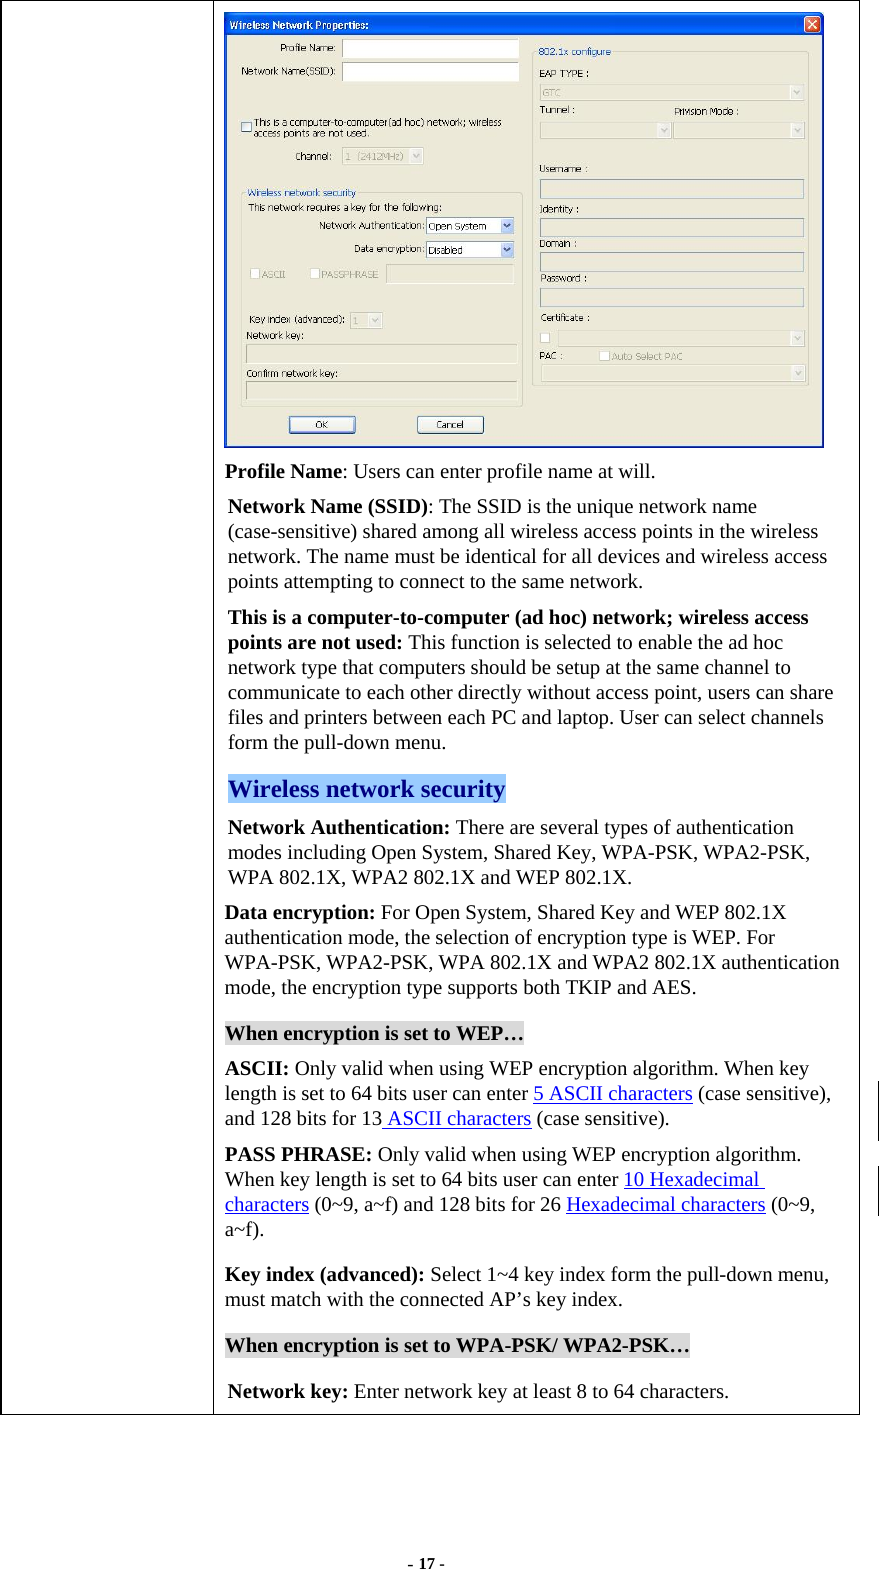  - 17 -  Profile Name: Users can enter profile name at will.   Network Name (SSID): The SSID is the unique network name (case-sensitive) shared among all wireless access points in the wireless network. The name must be identical for all devices and wireless access points attempting to connect to the same network. This is a computer-to-computer (ad hoc) network; wireless access points are not used: This function is selected to enable the ad hoc network type that computers should be setup at the same channel to communicate to each other directly without access point, users can share files and printers between each PC and laptop. User can select channels form the pull-down menu. Wireless network security Network Authentication: There are several types of authentication modes including Open System, Shared Key, WPA-PSK, WPA2-PSK, WPA 802.1X, WPA2 802.1X and WEP 802.1X. Data encryption: For Open System, Shared Key and WEP 802.1X authentication mode, the selection of encryption type is WEP. For WPA-PSK, WPA2-PSK, WPA 802.1X and WPA2 802.1X authentication mode, the encryption type supports both TKIP and AES. When encryption is set to WEP… ASCII: Only valid when using WEP encryption algorithm. When key length is set to 64 bits user can enter 5 ASCII characters (case sensitive), and 128 bits for 13 ASCII characters (case sensitive). PASS PHRASE: Only valid when using WEP encryption algorithm. When key length is set to 64 bits user can enter 10 Hexadecimal characters (0~9, a~f) and 128 bits for 26 Hexadecimal characters (0~9, a~f). Key index (advanced): Select 1~4 key index form the pull-down menu, must match with the connected AP’s key index. When encryption is set to WPA-PSK/ WPA2-PSK… Network key: Enter network key at least 8 to 64 characters. 